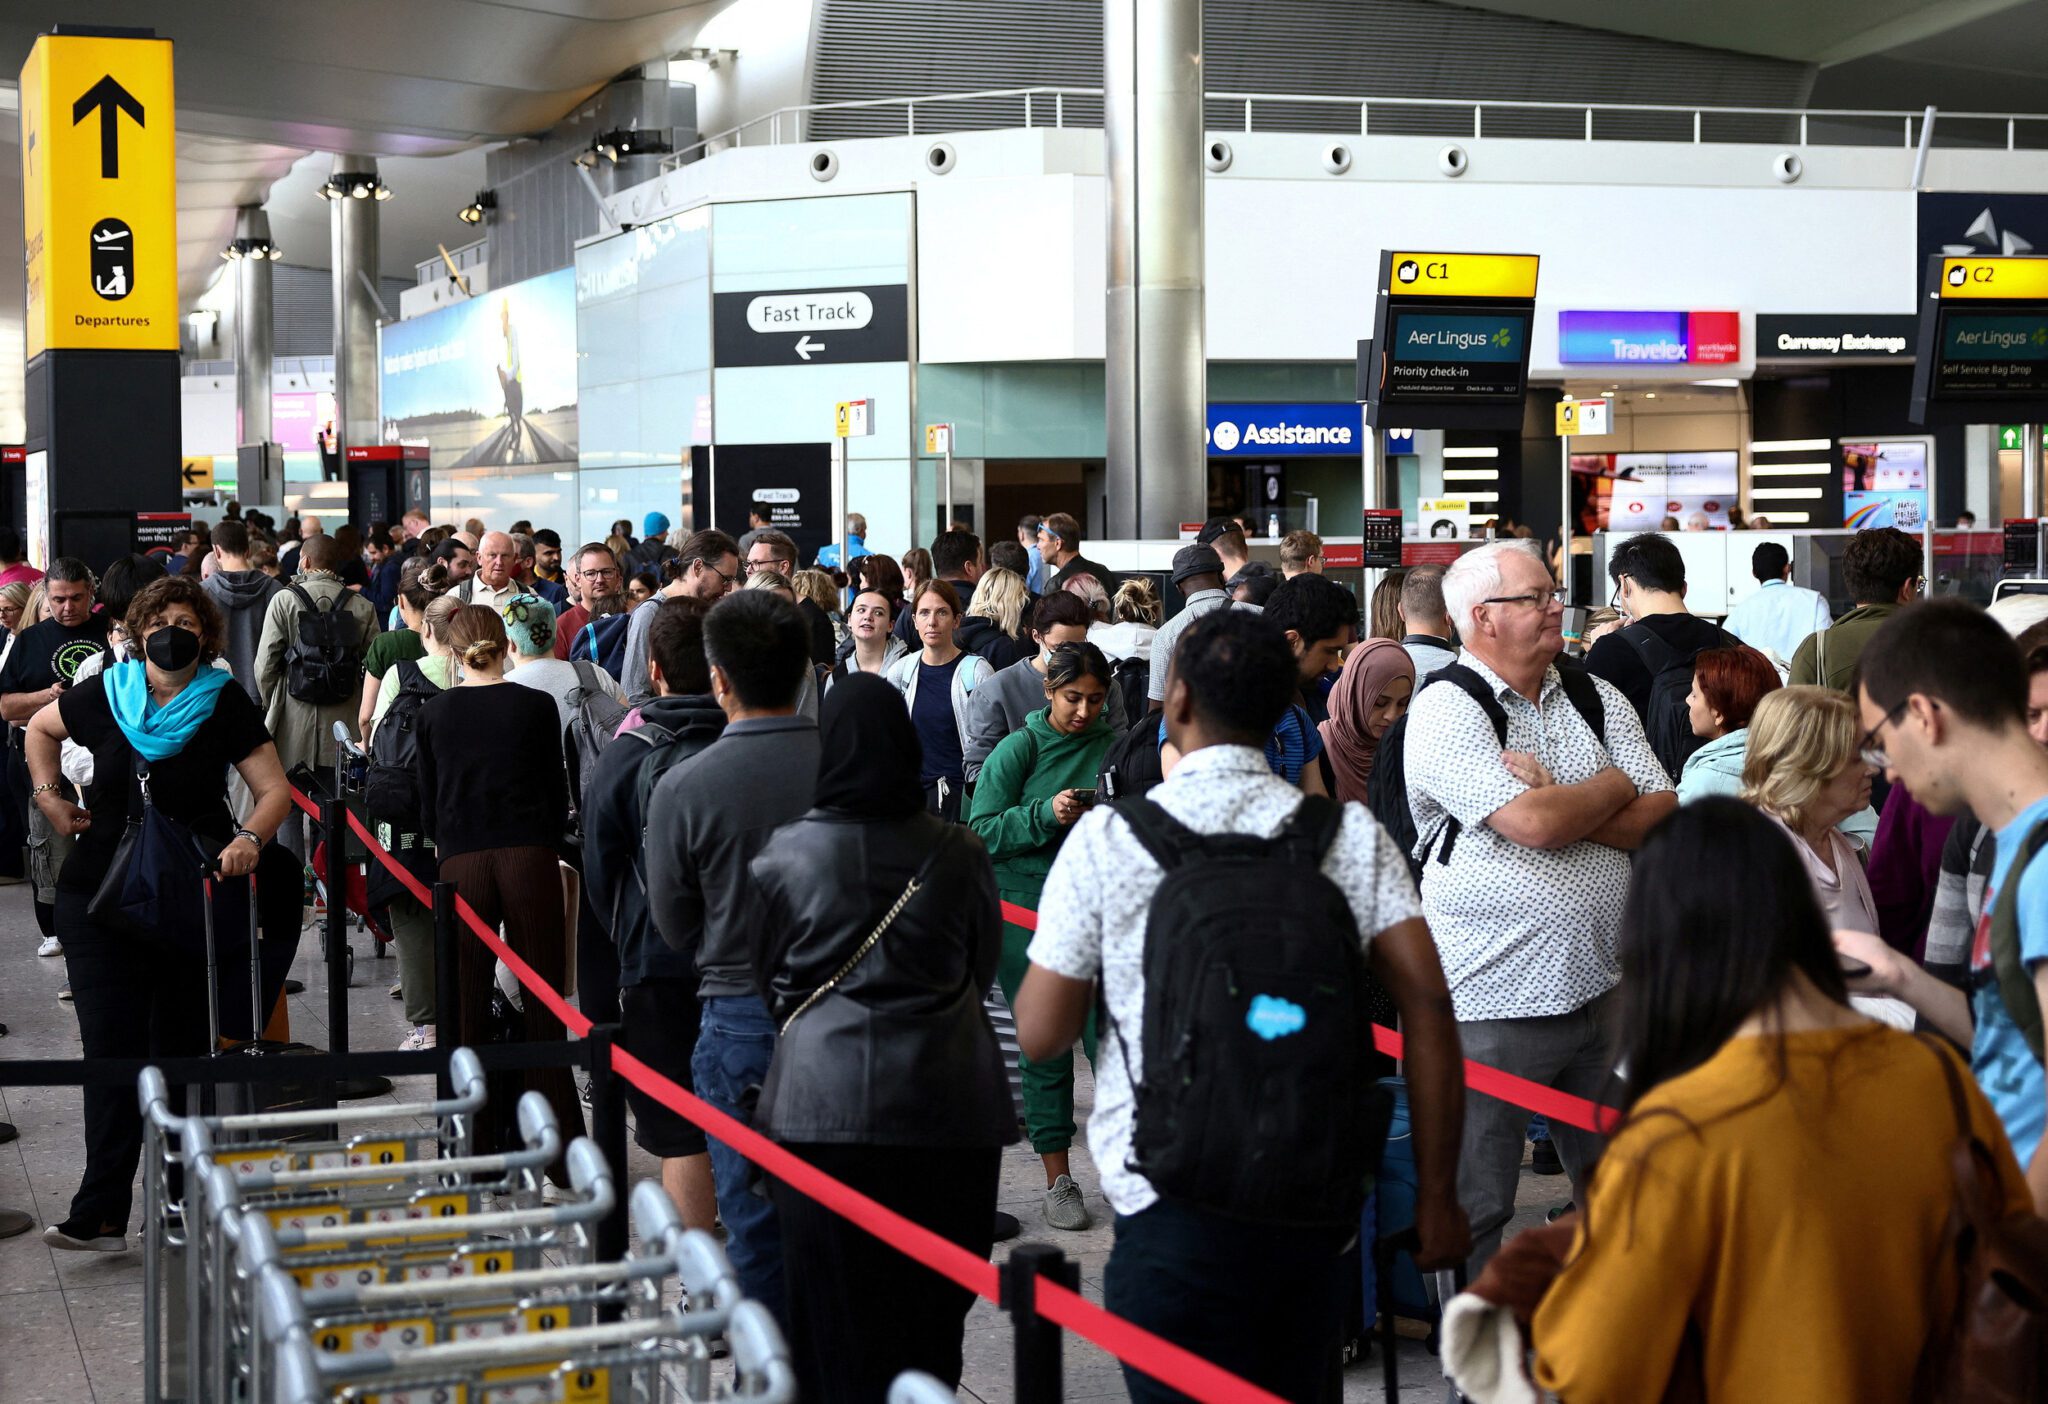 Passengers in line at Terminal 2 at Heathrow Airport in London. 